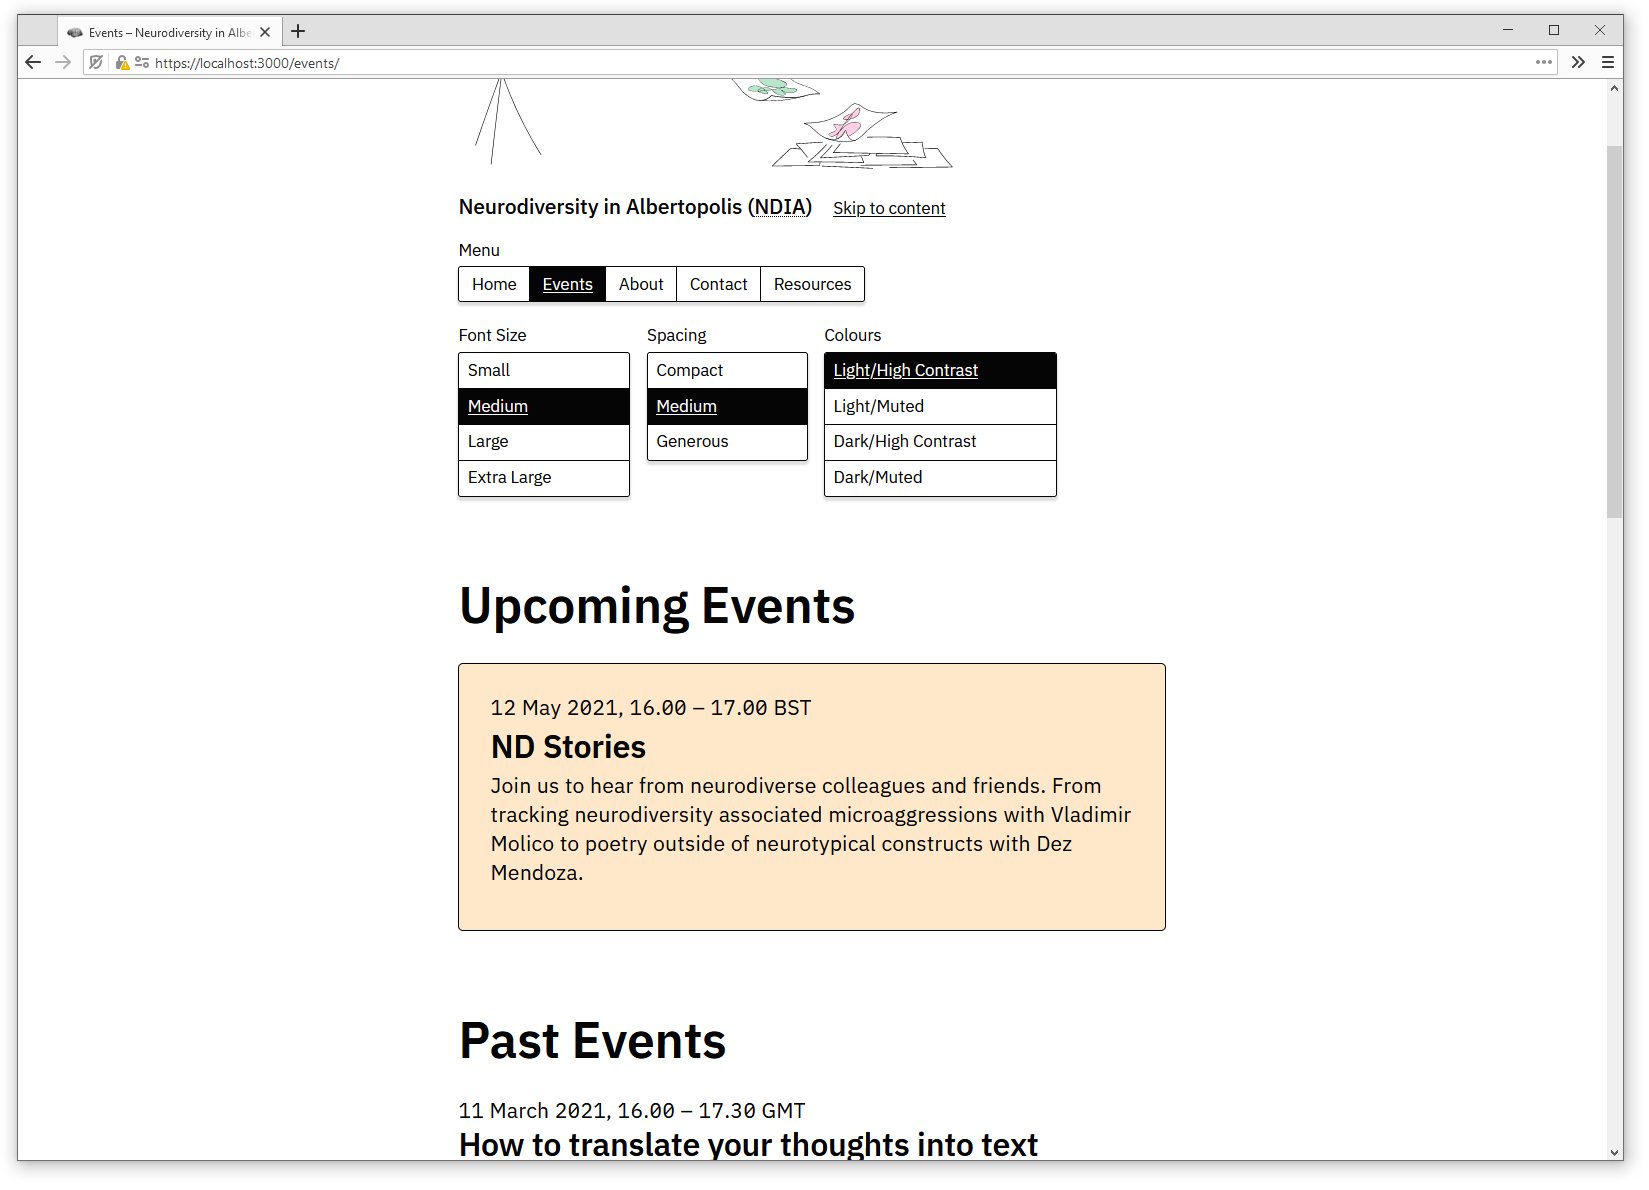 Screenshot of NDIA website. A header illustration, site menu, and a list of upcoming and past events is visible.